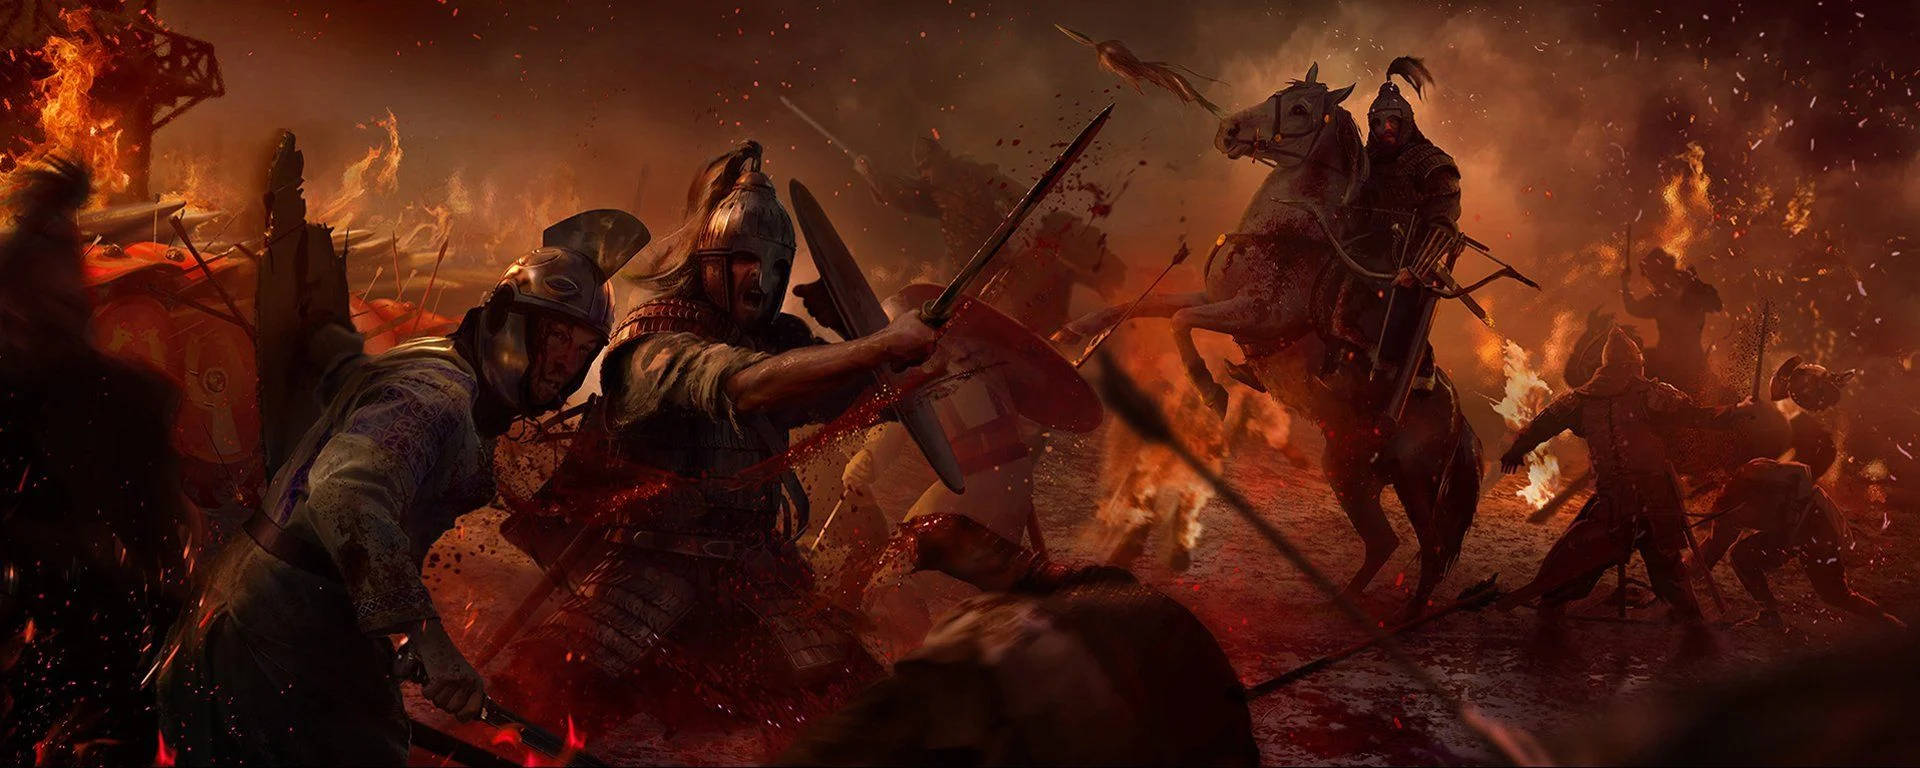 Caption: Epic Battle Scene From Total War: Rome 2 Background